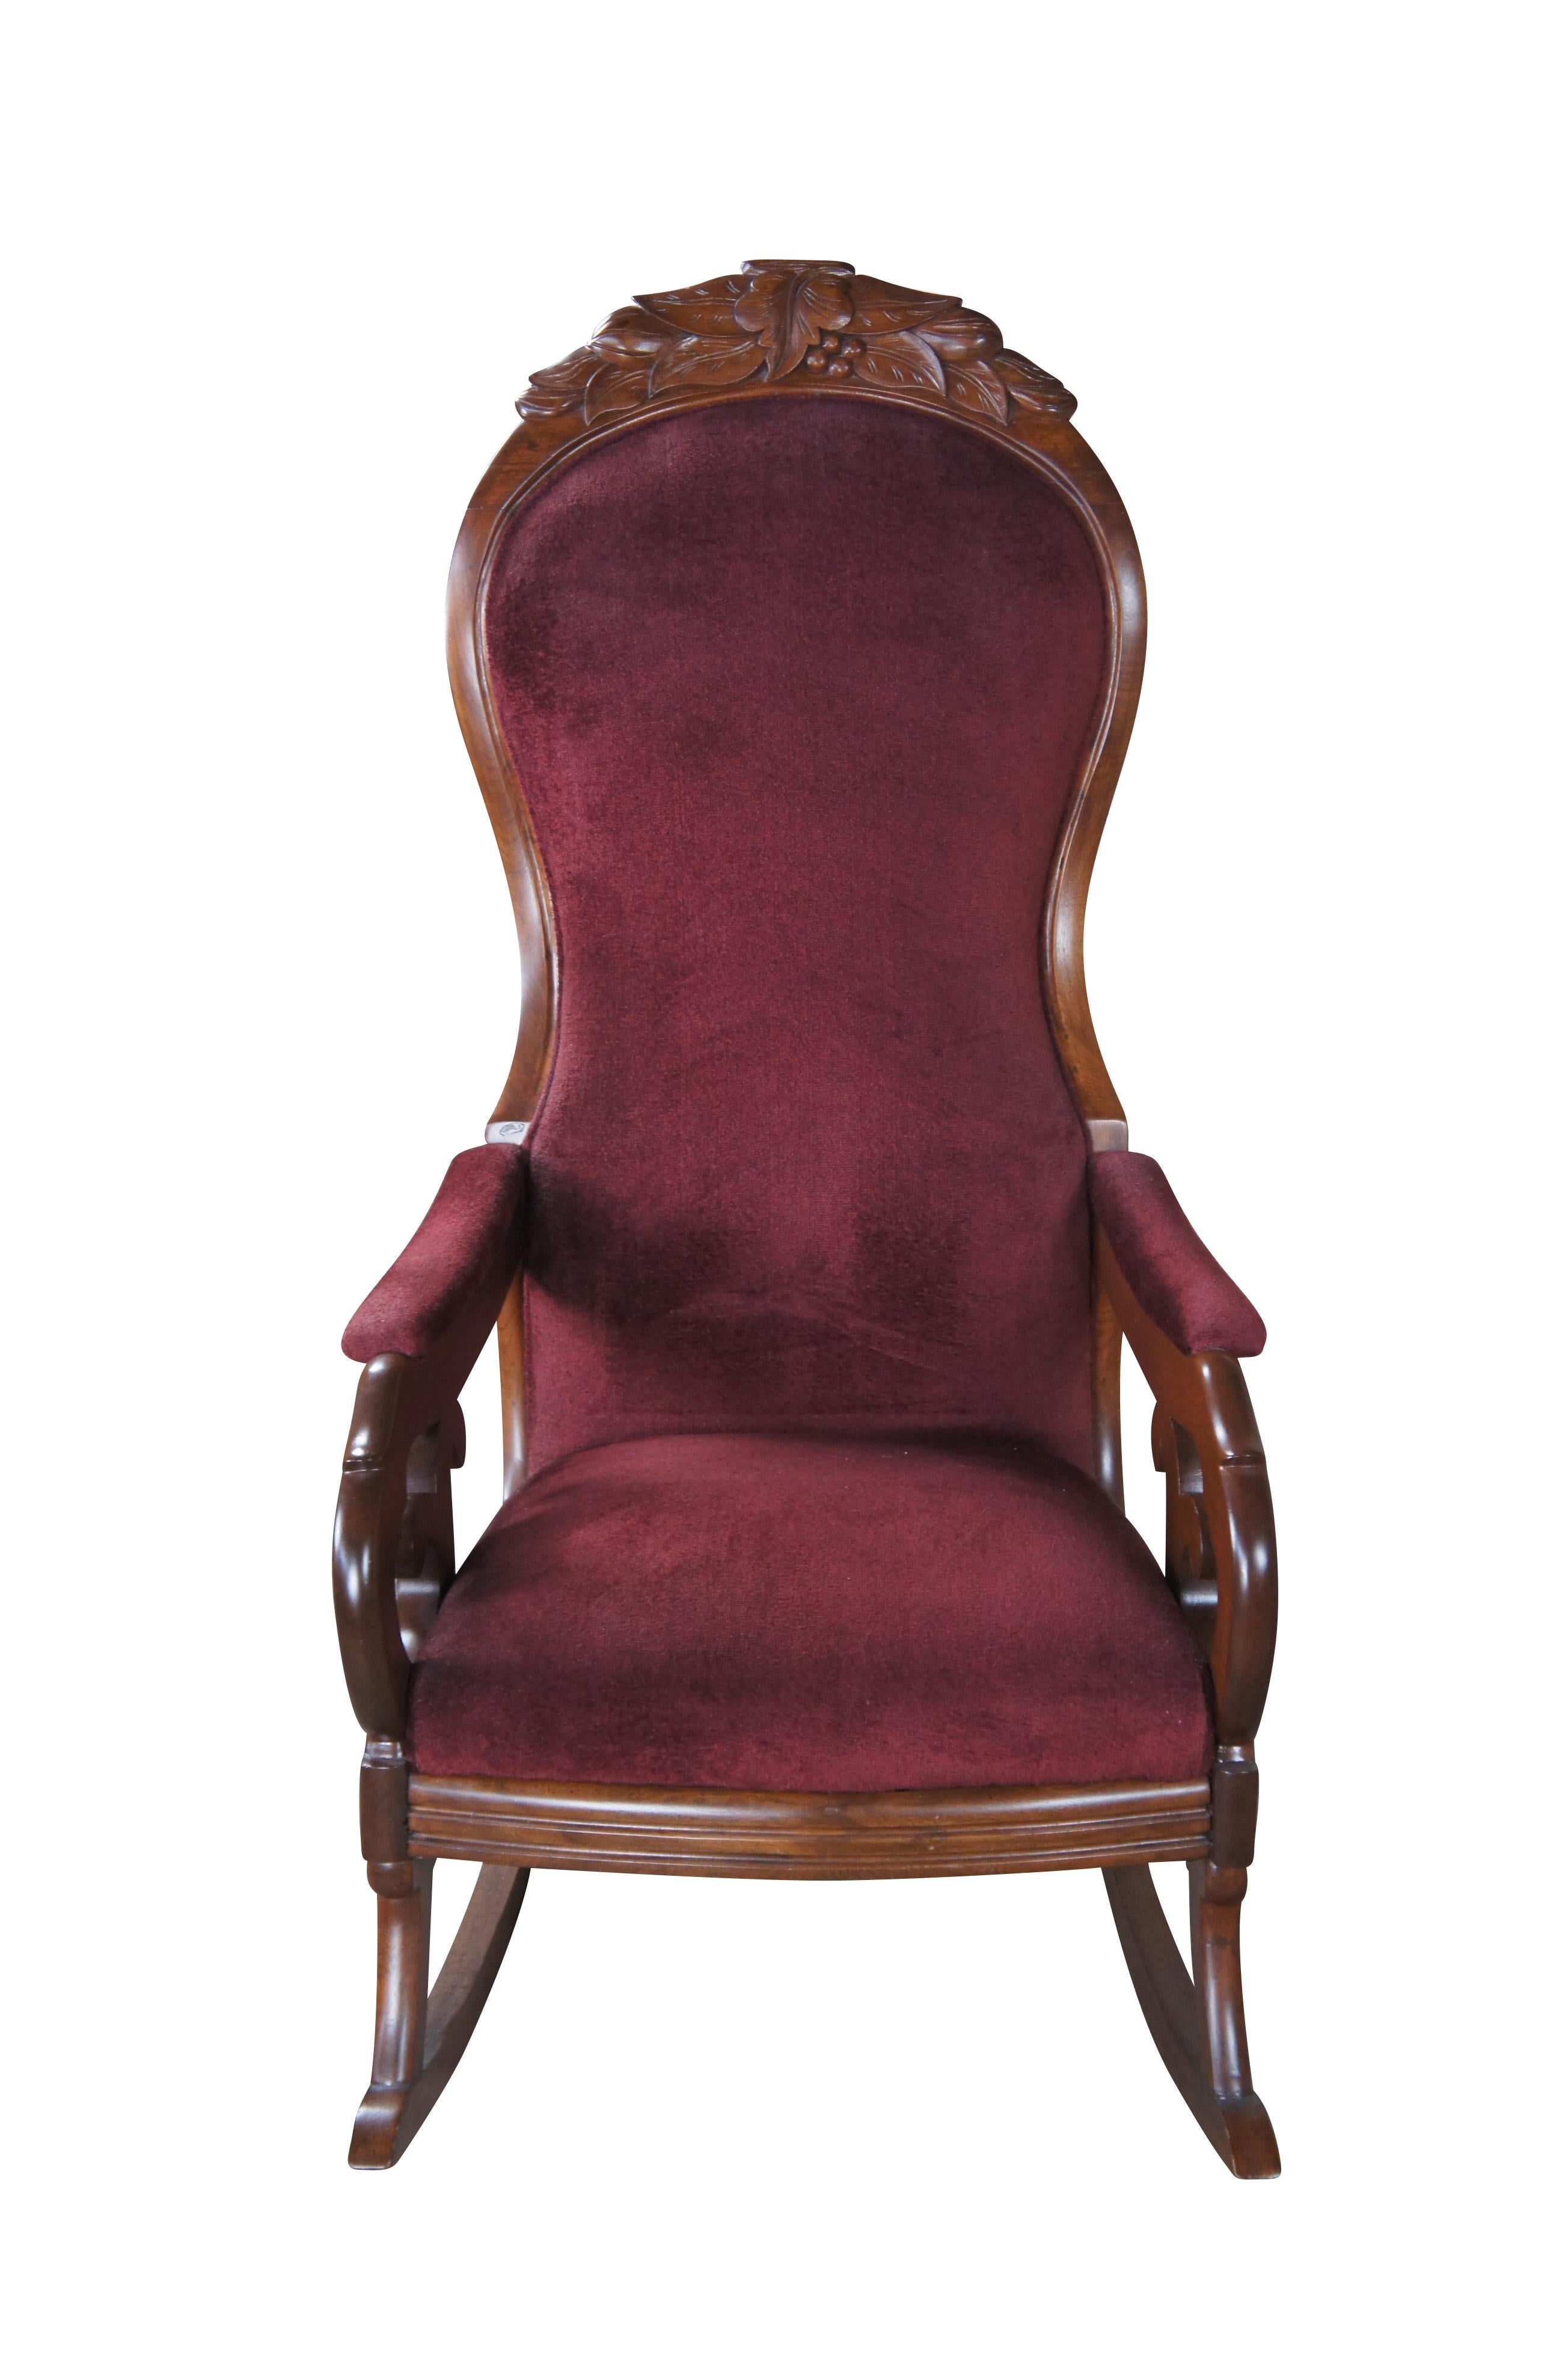 Antique Victorian Aesthetic Movement rocking armchair. Made of walnut featuring serpentine form with velvet / velour upholstery, padded arms, and tall back carved with berry and leaf design.

Attributed to William Roberts of